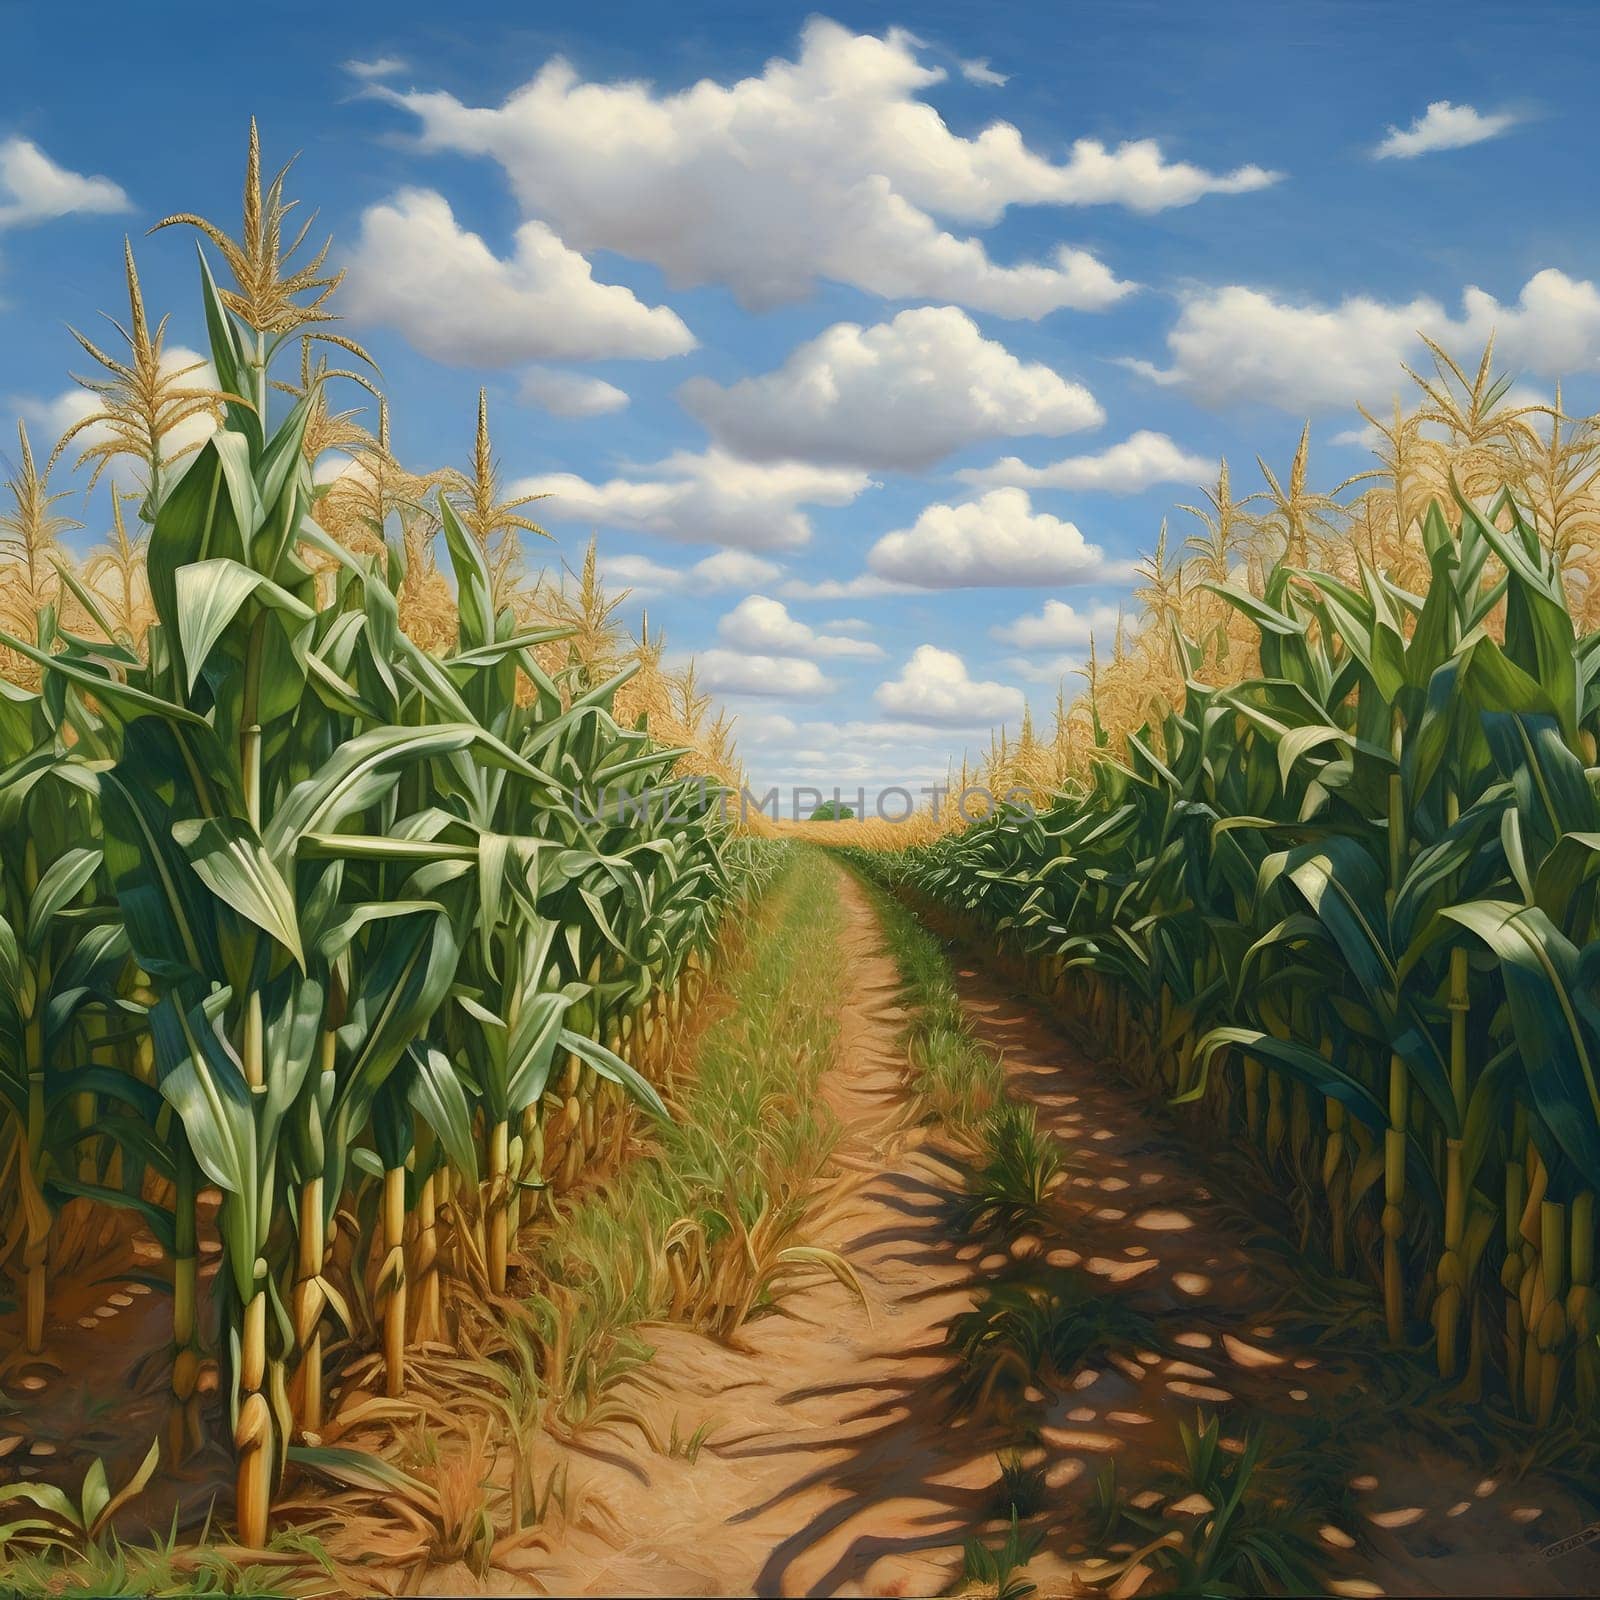 A path in a corn field. Corn as a dish of thanksgiving for the harvest. An atmosphere of joy and celebration.